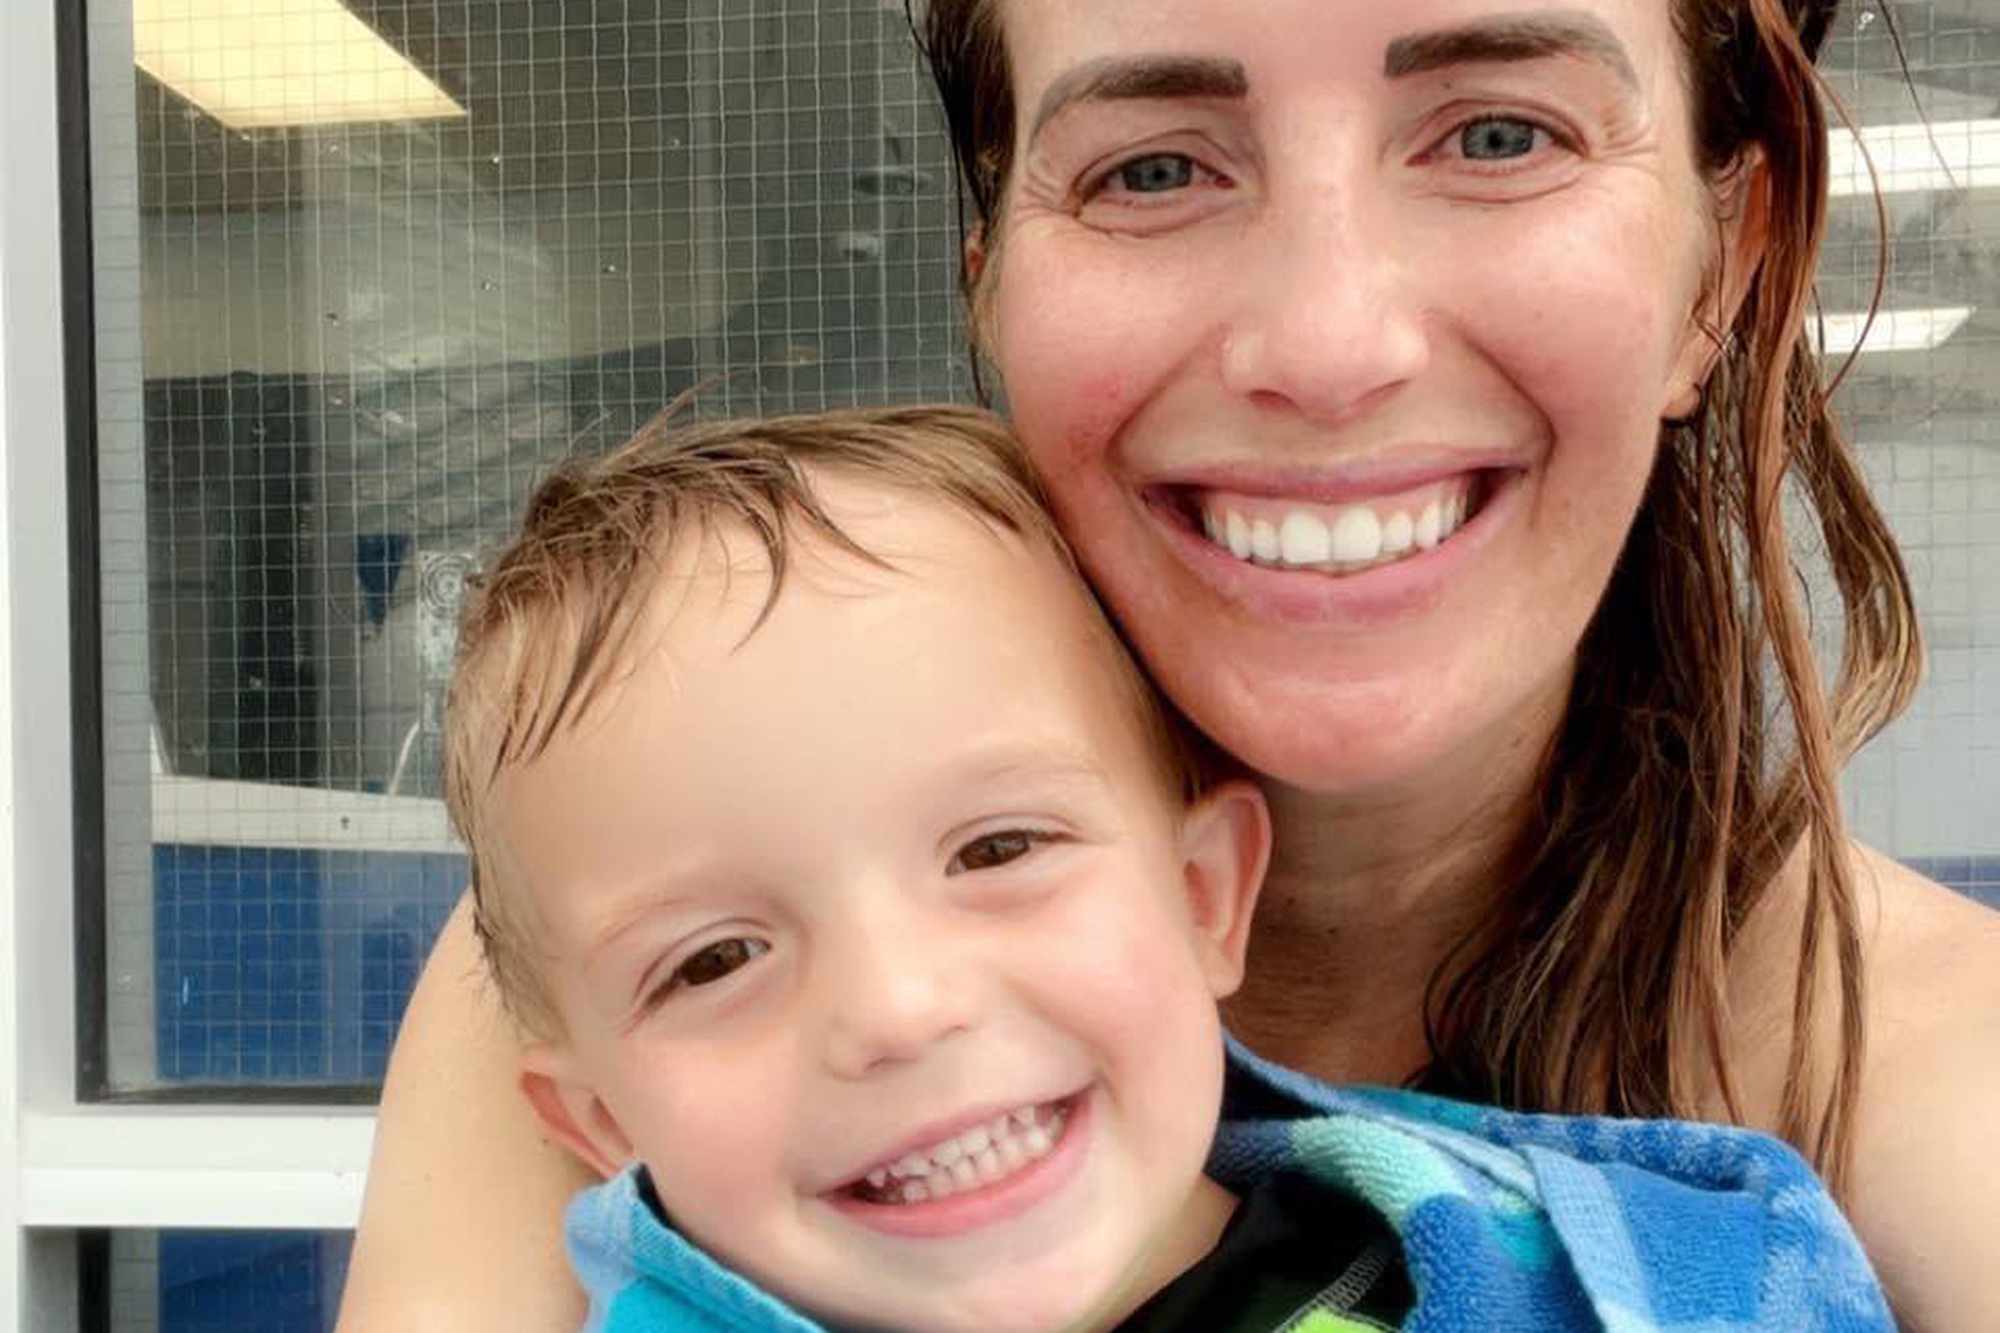 Levi Wright’s Mom Shares Health Update, Says New 'Goal' Is to See If He Can Breathe on His Own